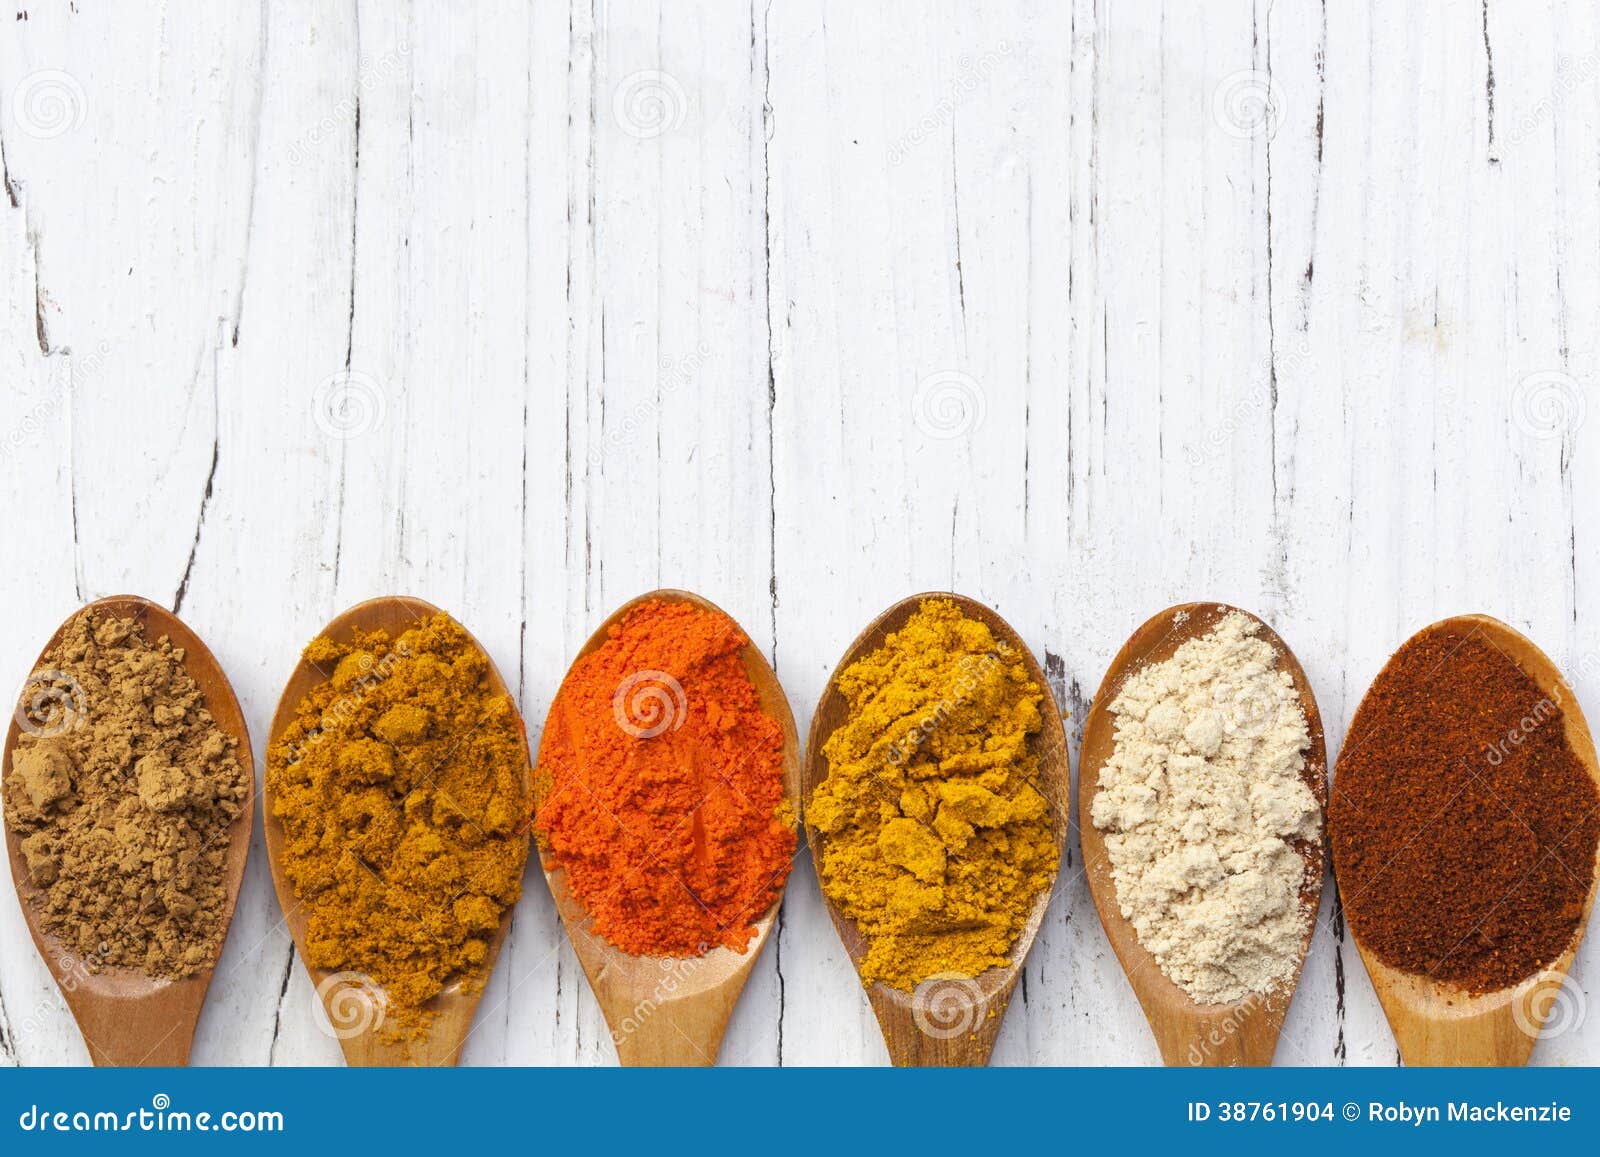 spices on wooden spoons